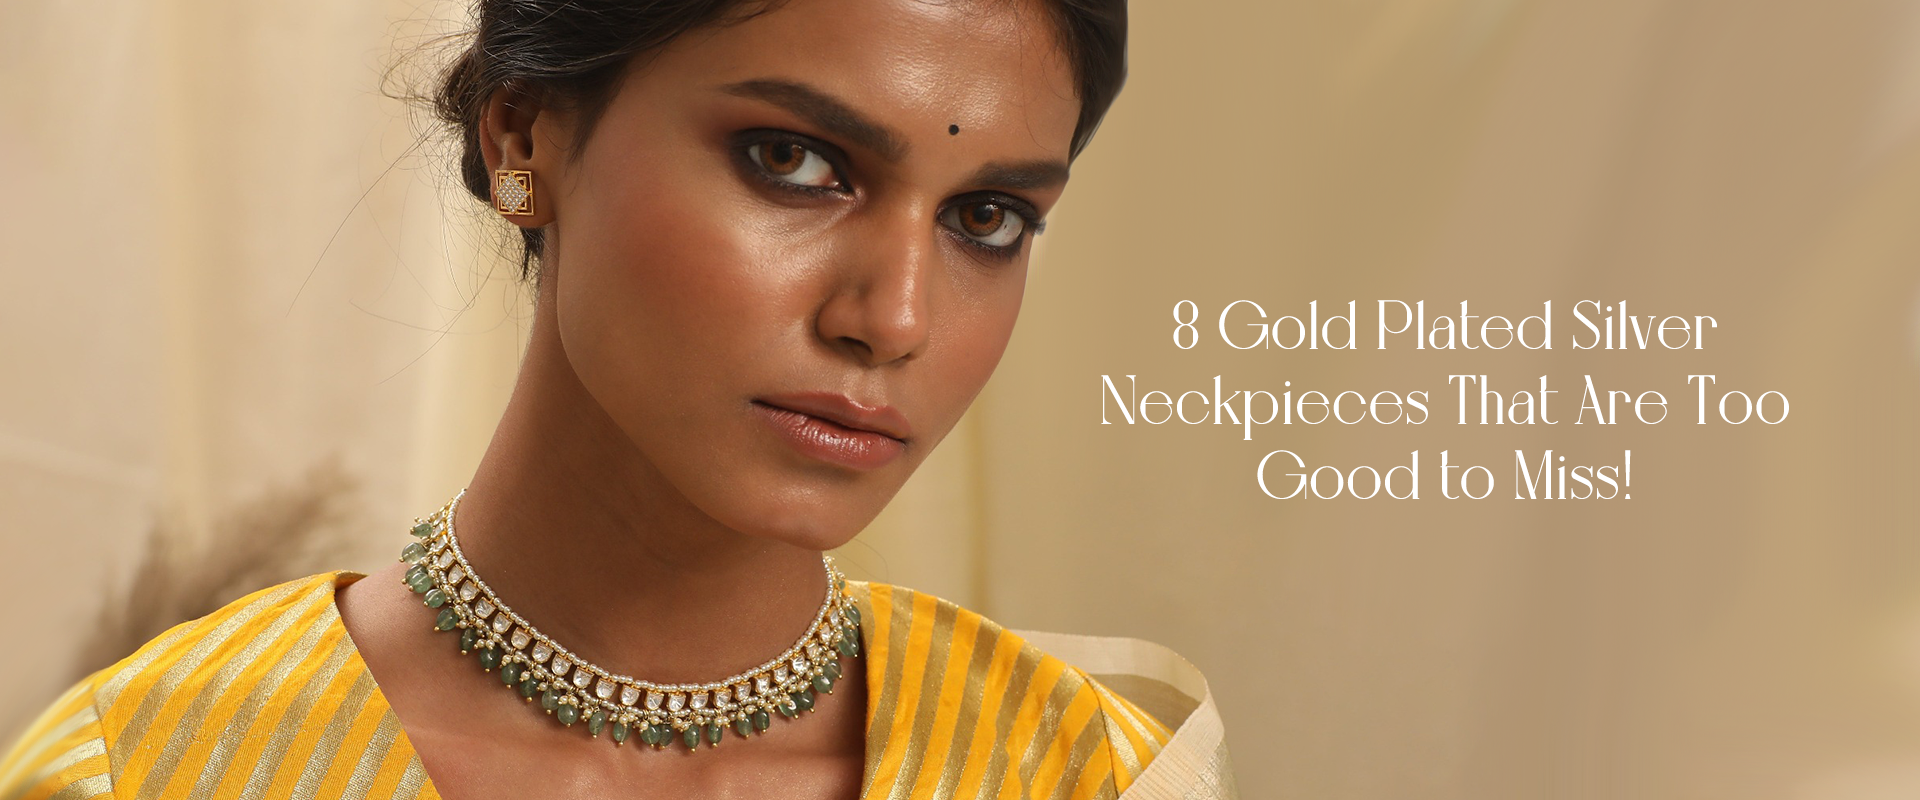 8 Gold Plated Silver Neckpieces That Are Too Good to Miss!